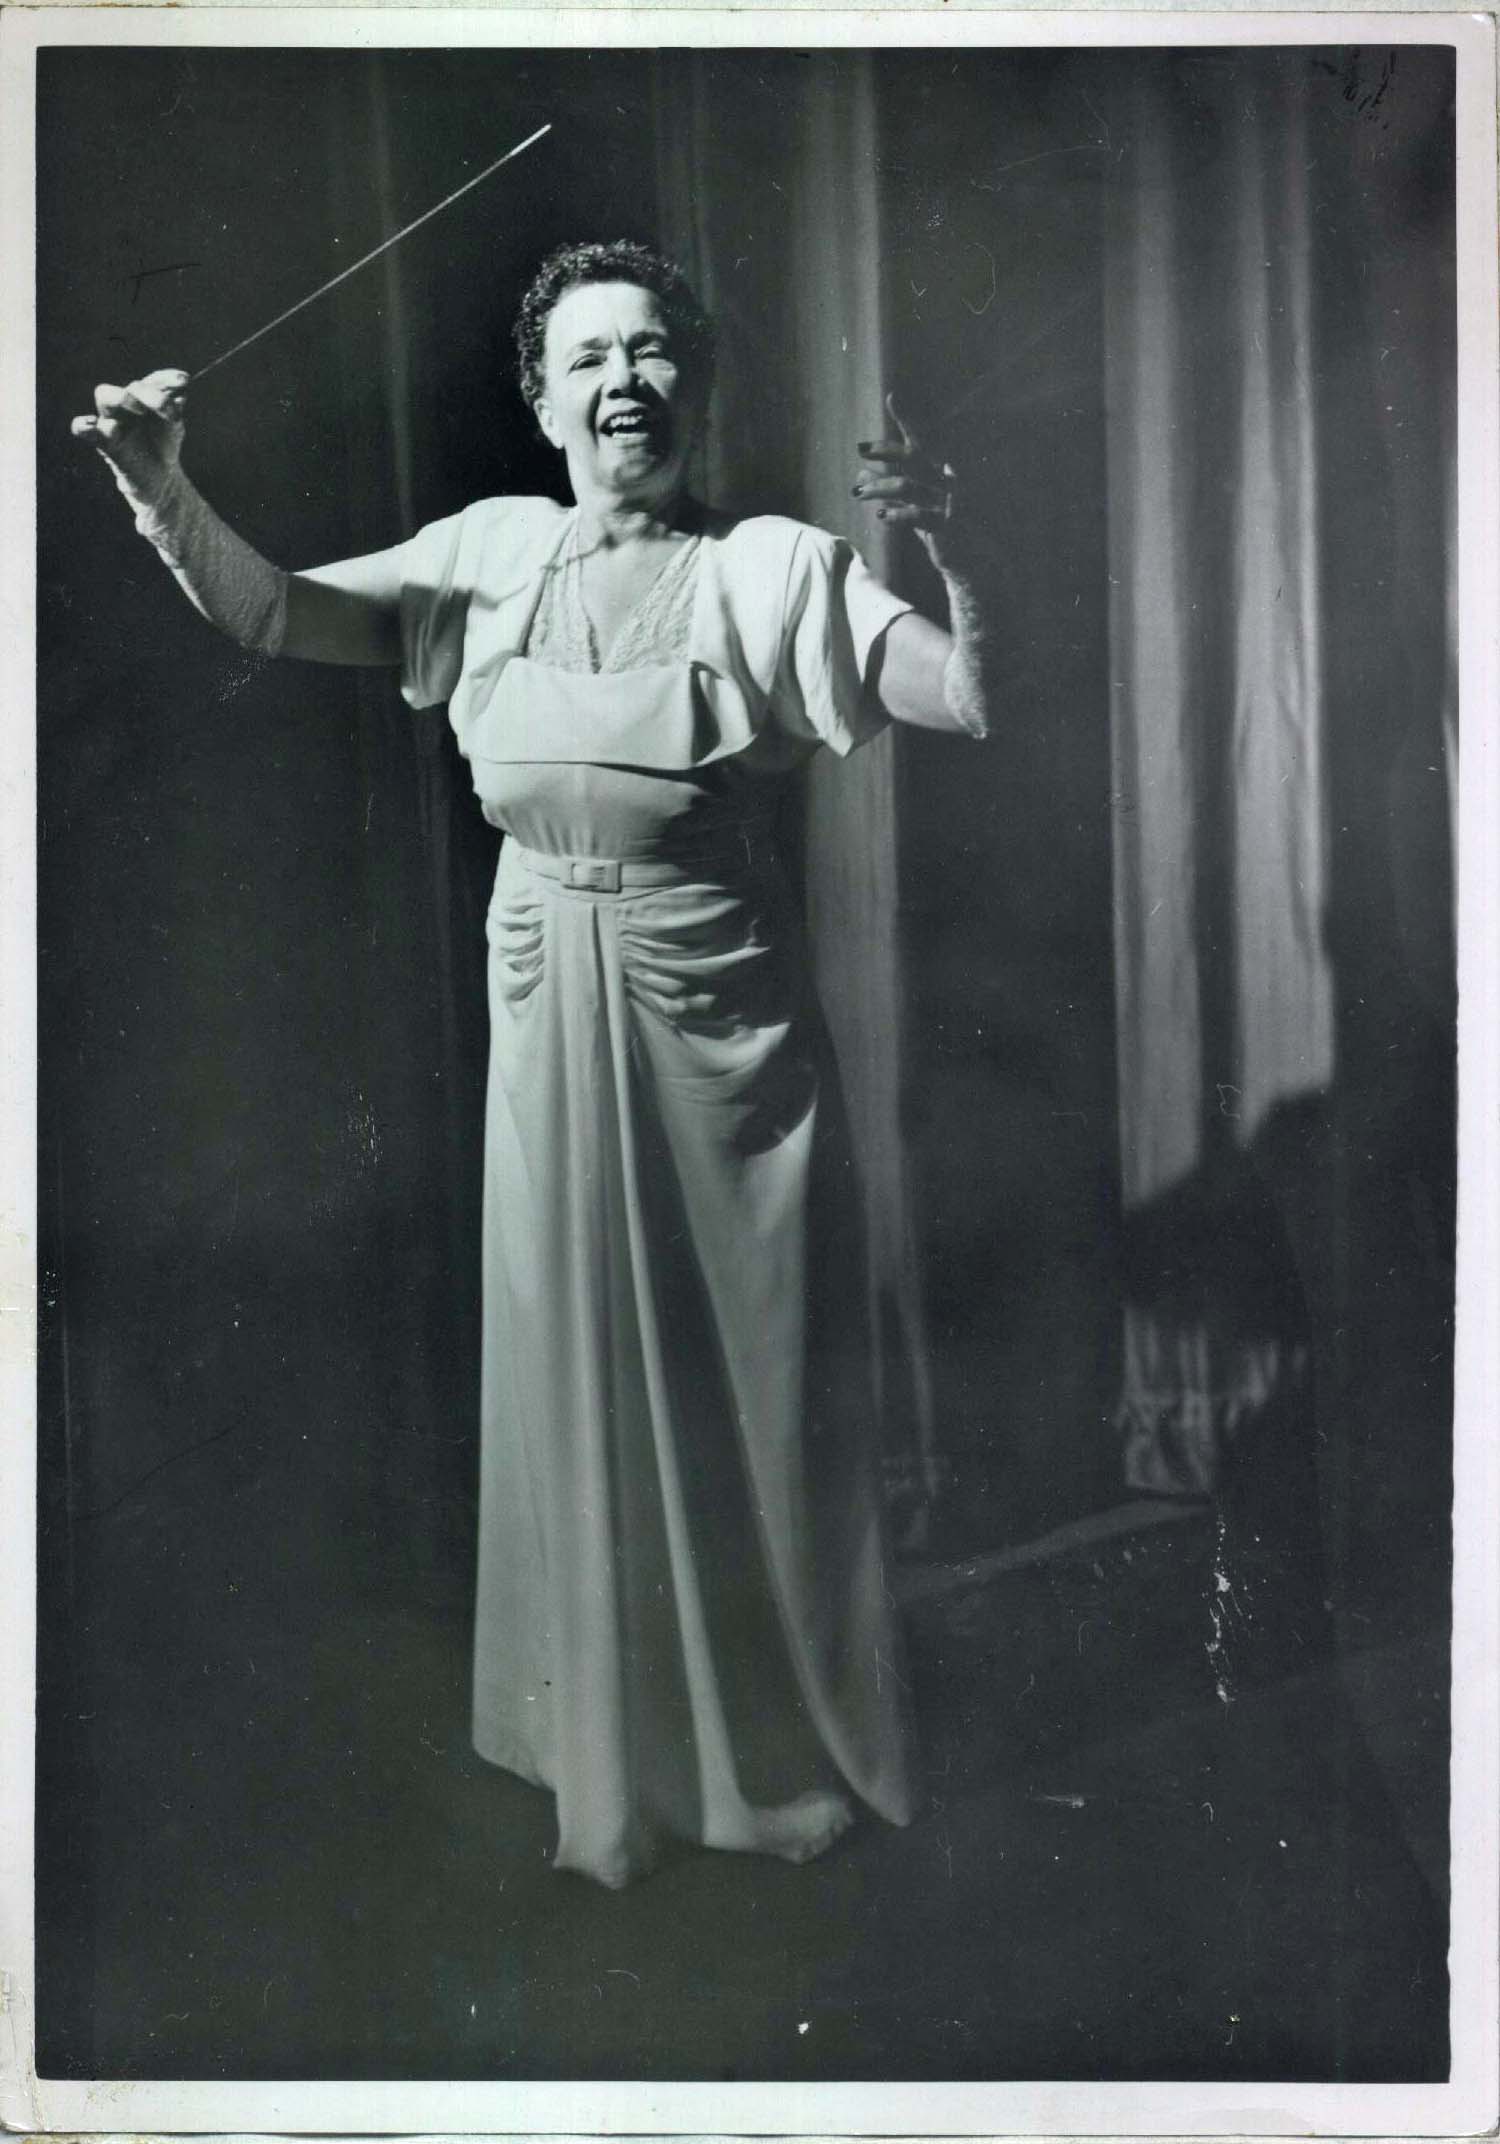 Isabele Taliaferro Spiller smiles broadly while conducting